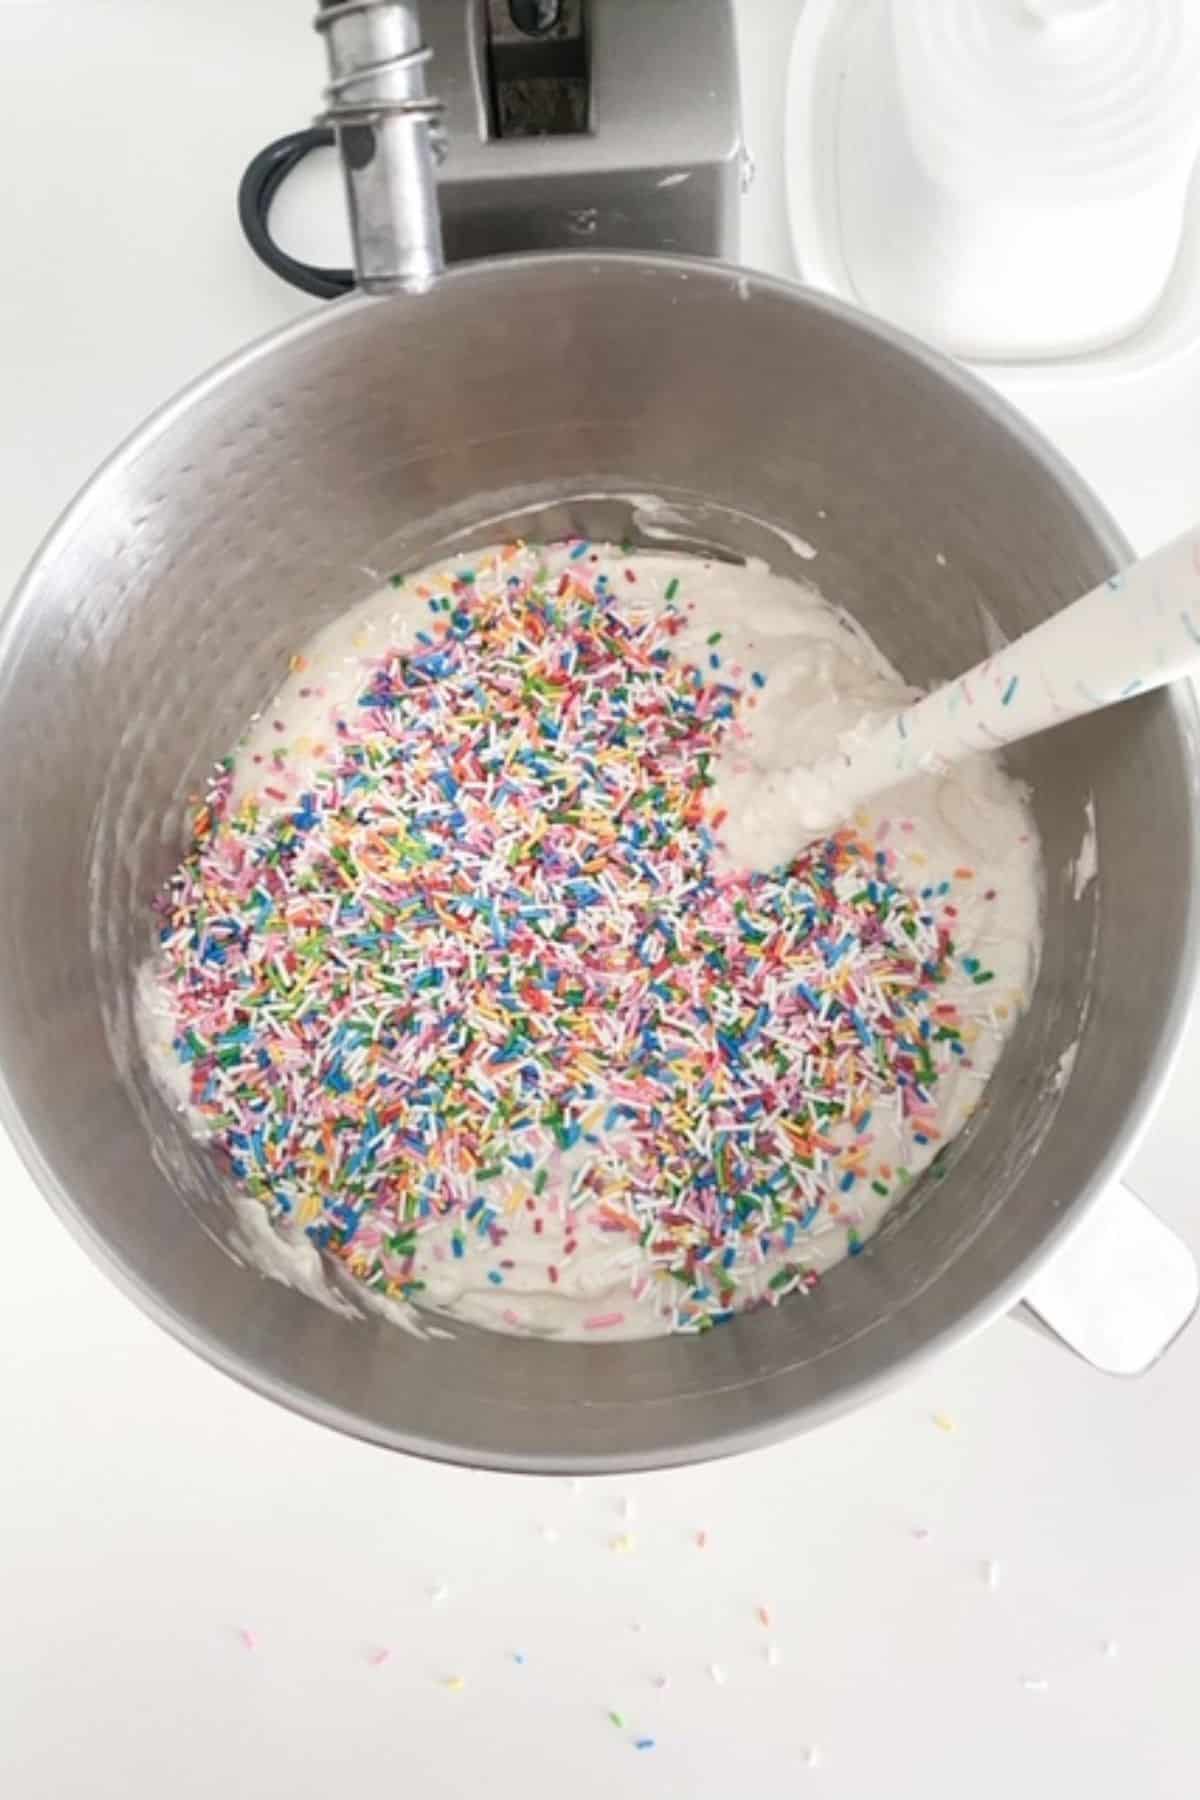 gluten-free cake batter with sprinkles in it